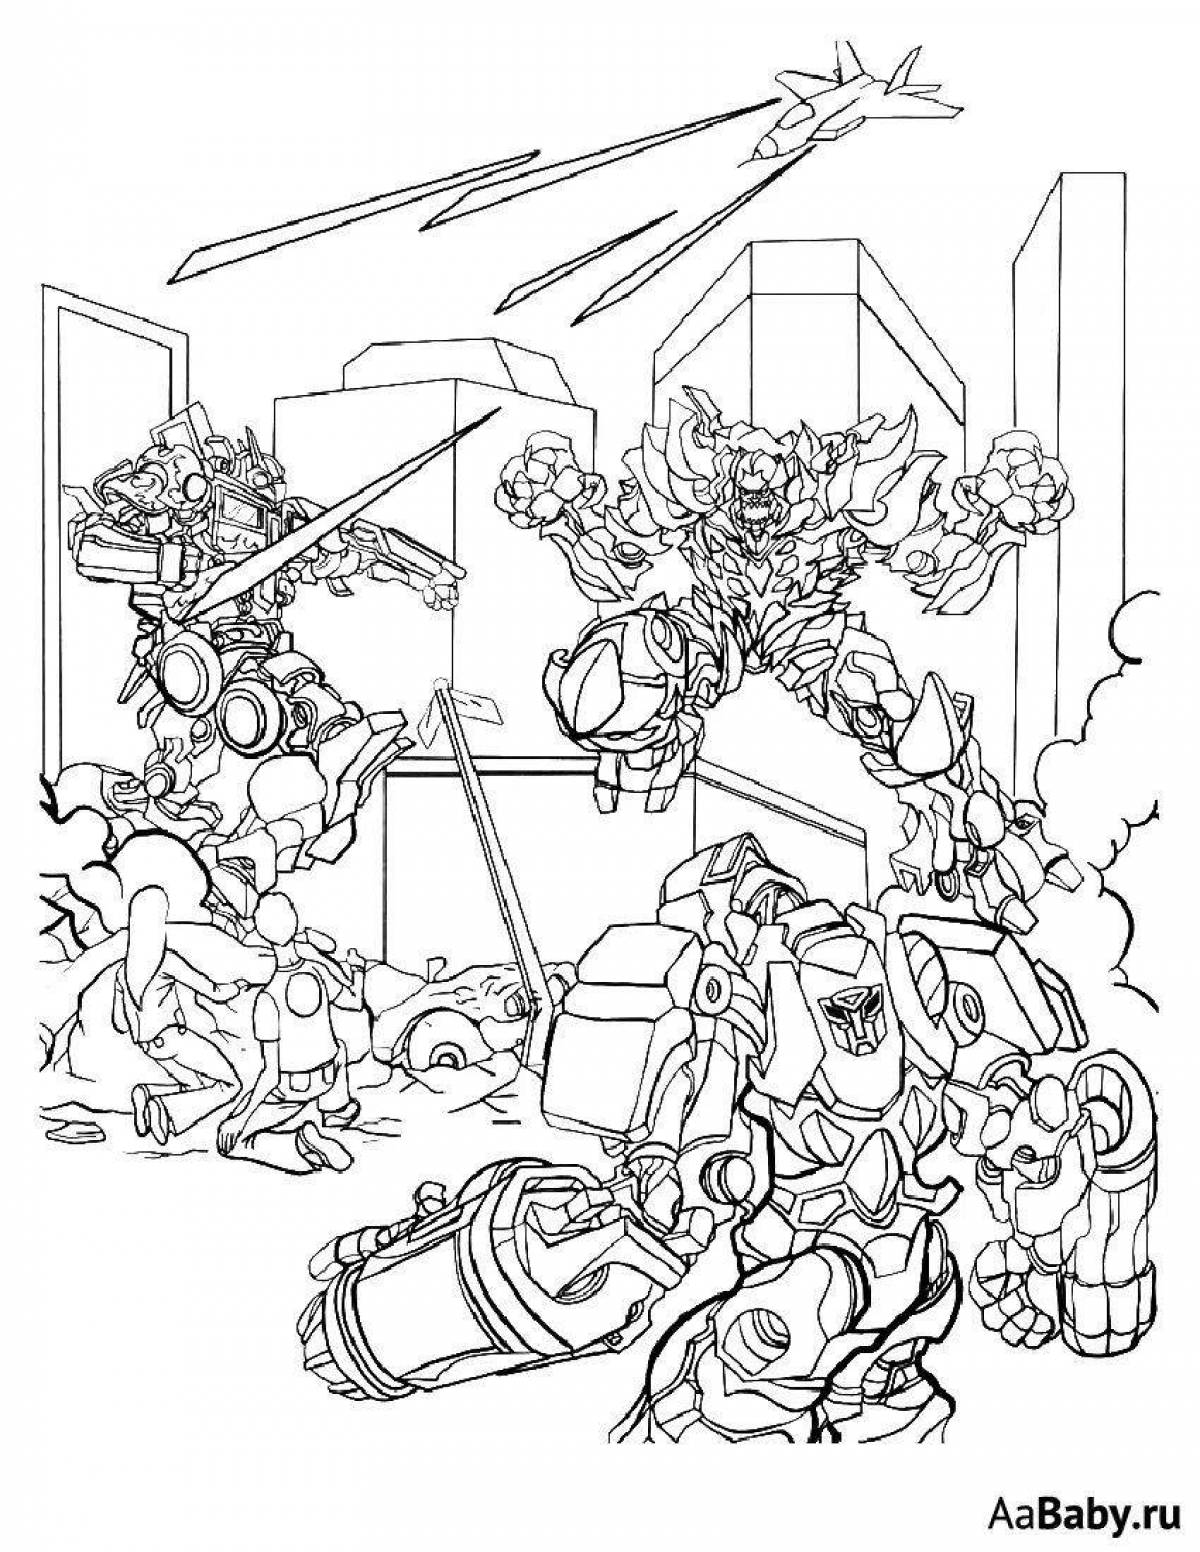 Decepticon transformers magnanimous coloring pages